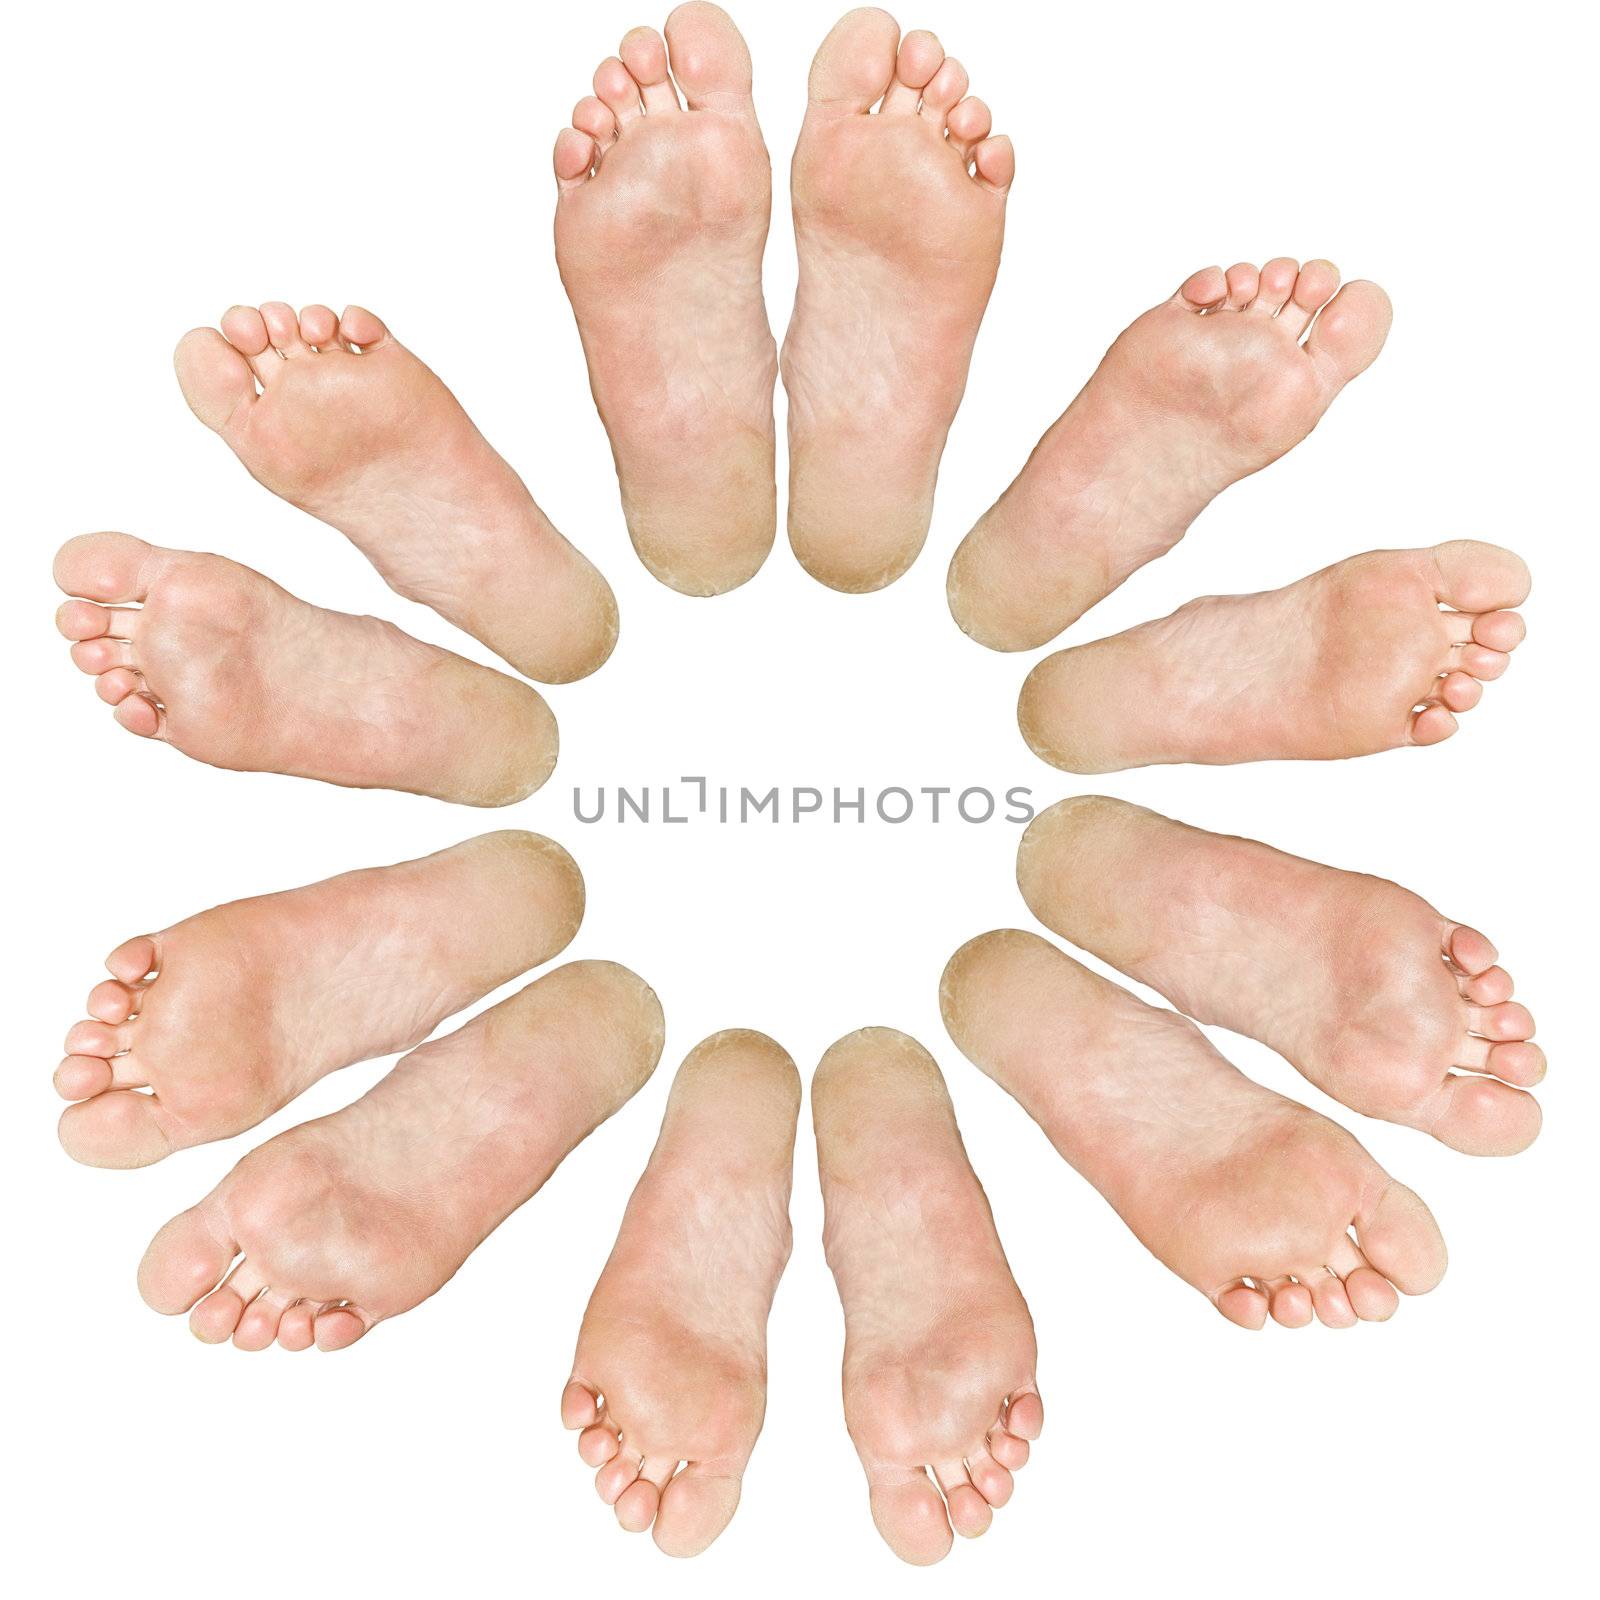 The large and small feet. Circle. Isolated over white background